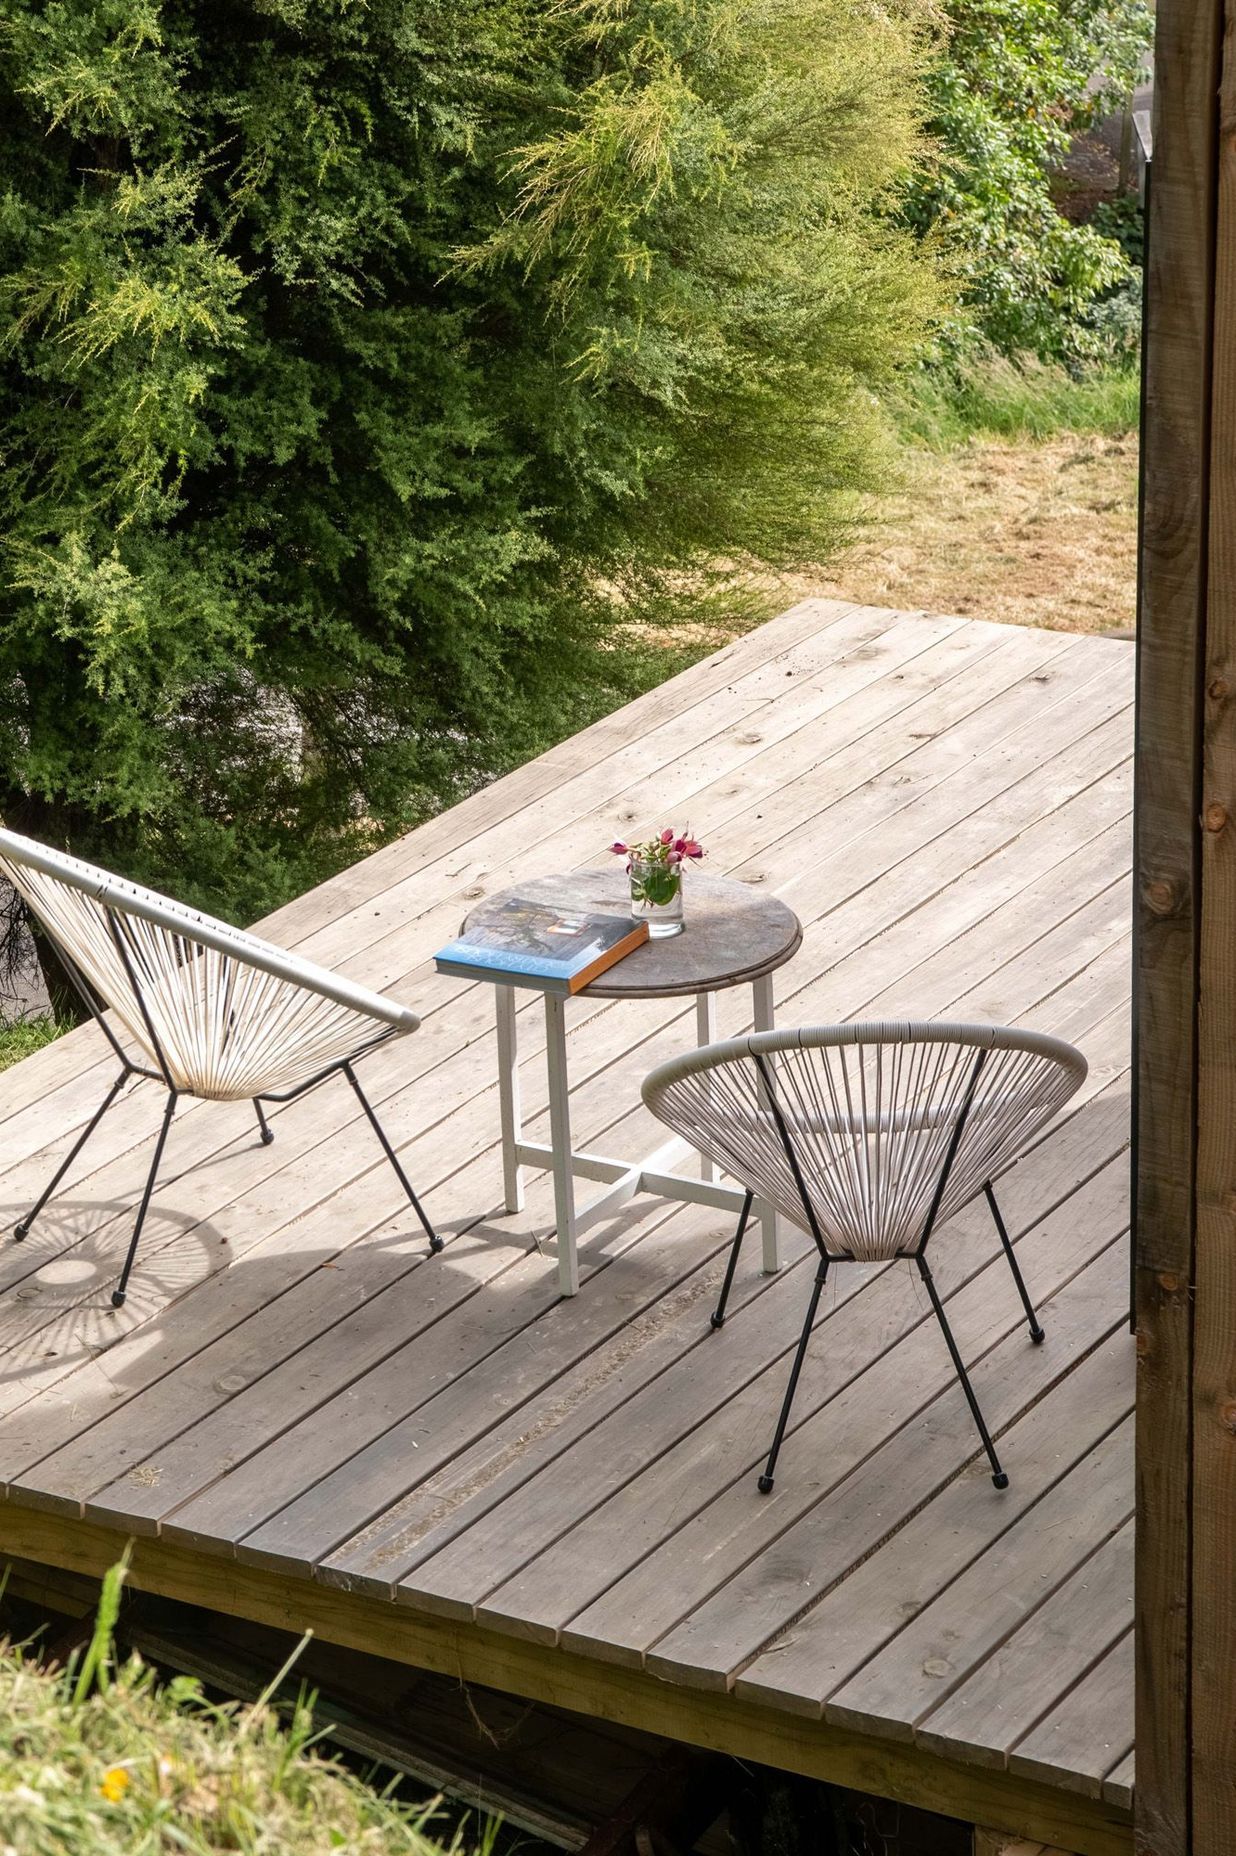 The timber deck with acapulco chairs is the perfect place to relax and listen to the nearby birdsong.